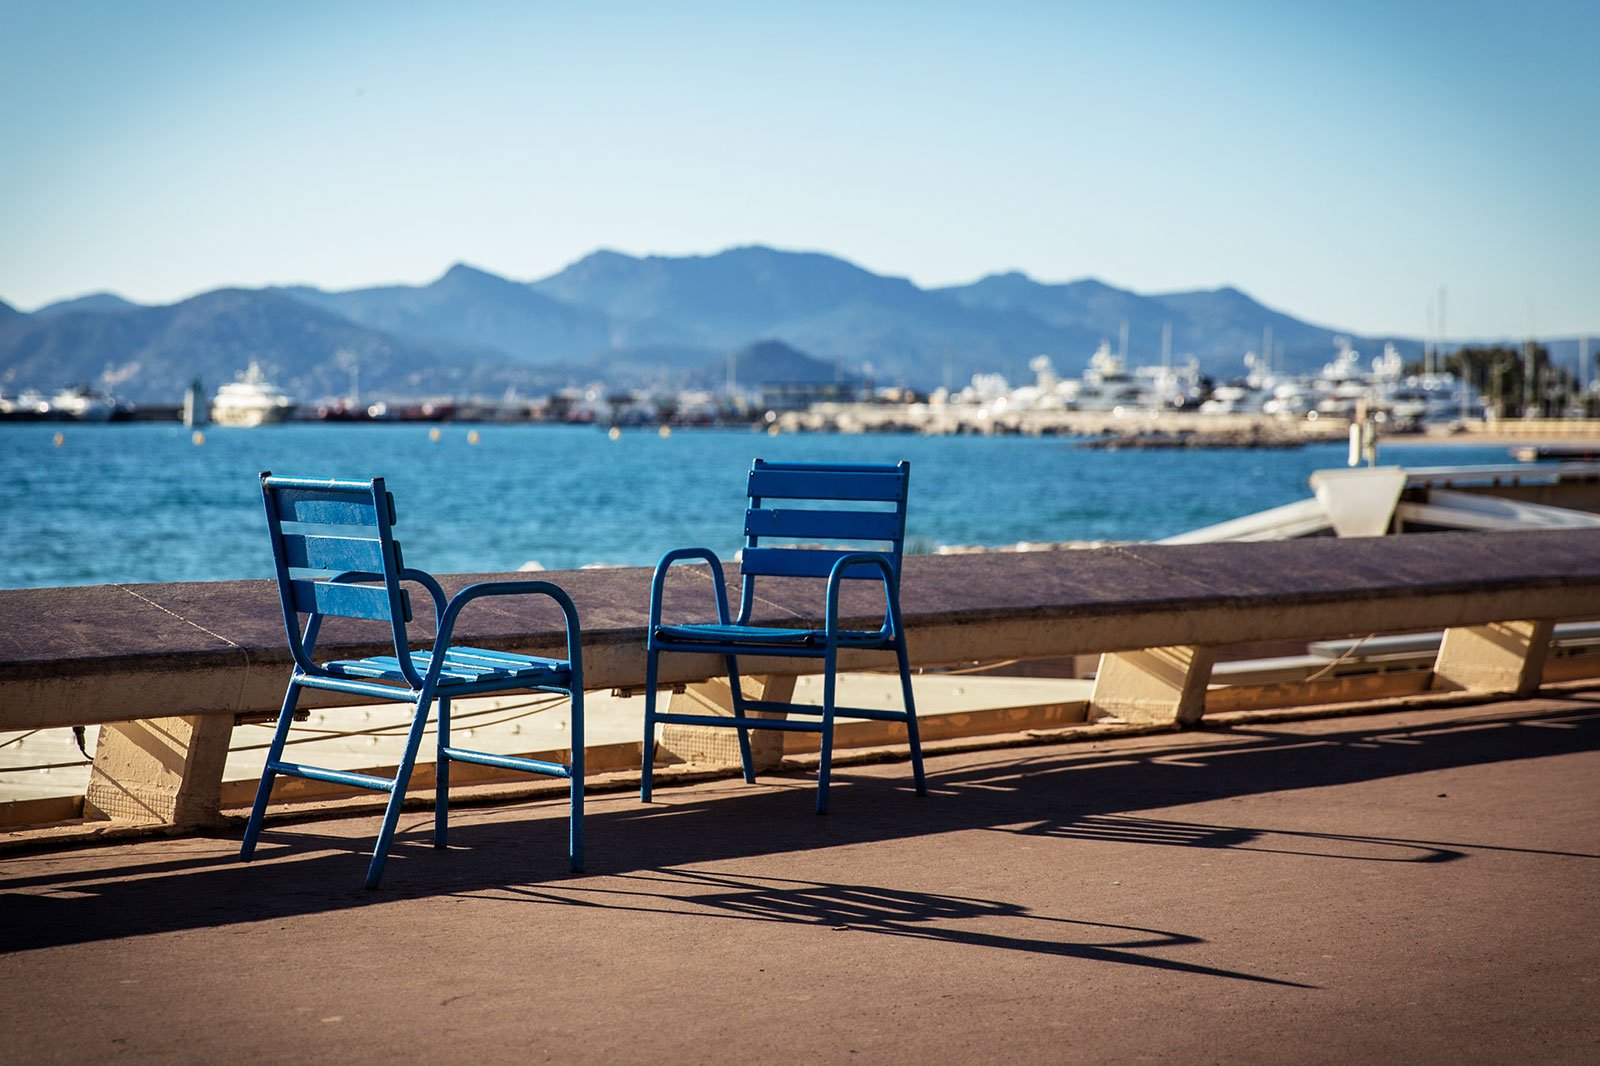 How to have a rest in the blue chair on the Promenade de la Croisette in Cannes